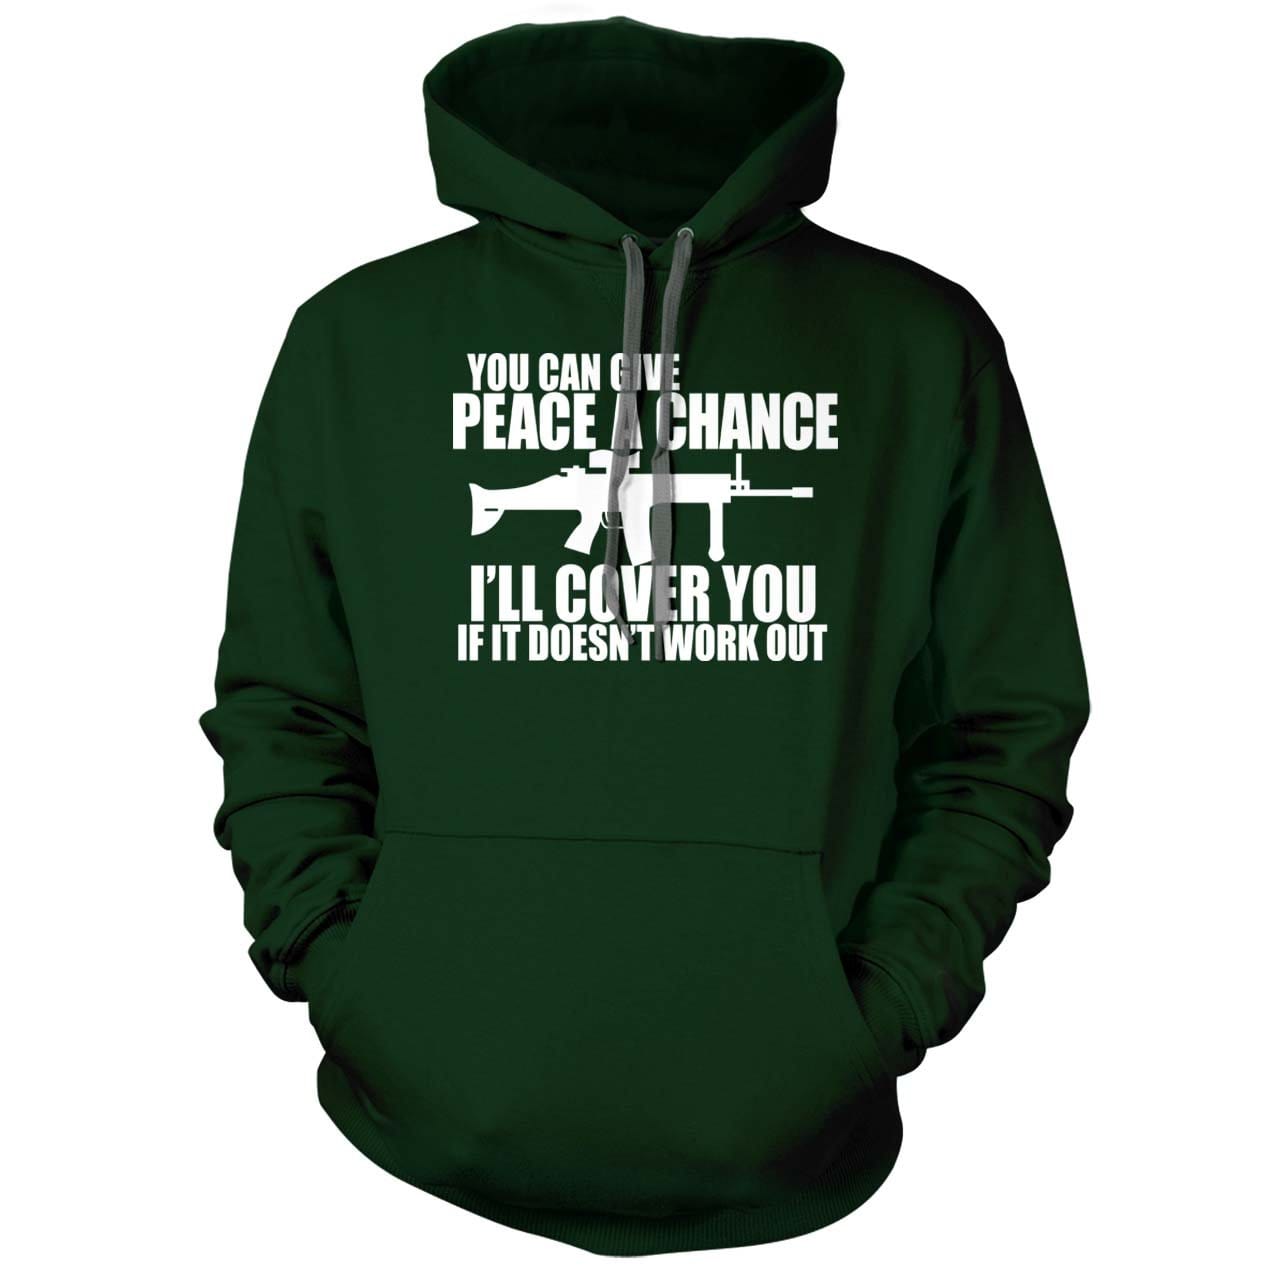 You Can Give Peace a Chance Forest Green Hoodie